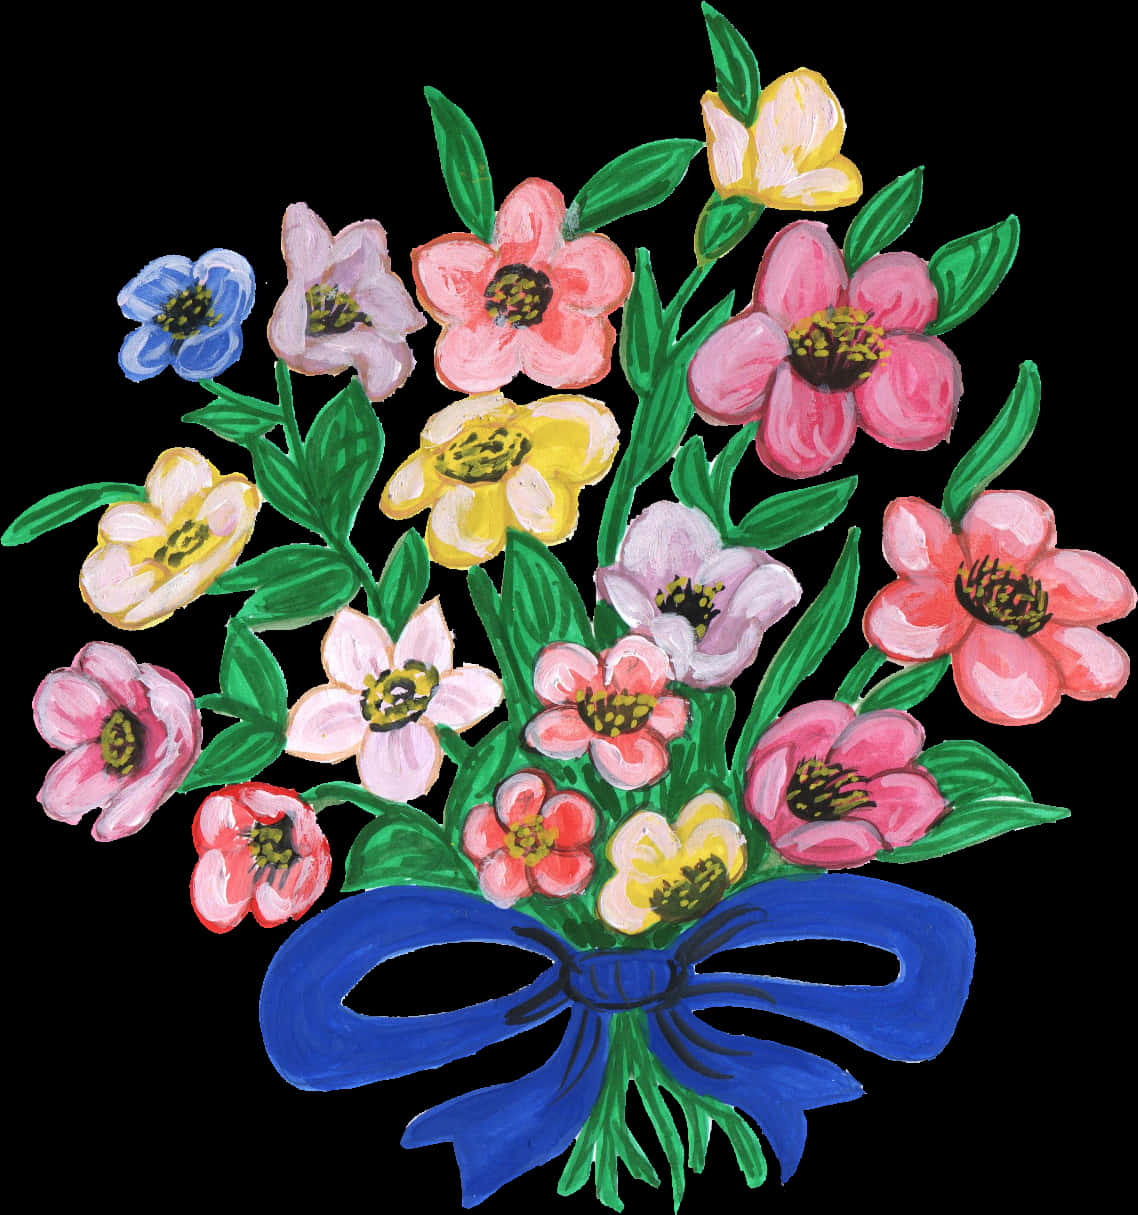 Flower Bouquet Border Png - Flower Bouquets With 5 Flowers Pictures To Download, Transparent Png